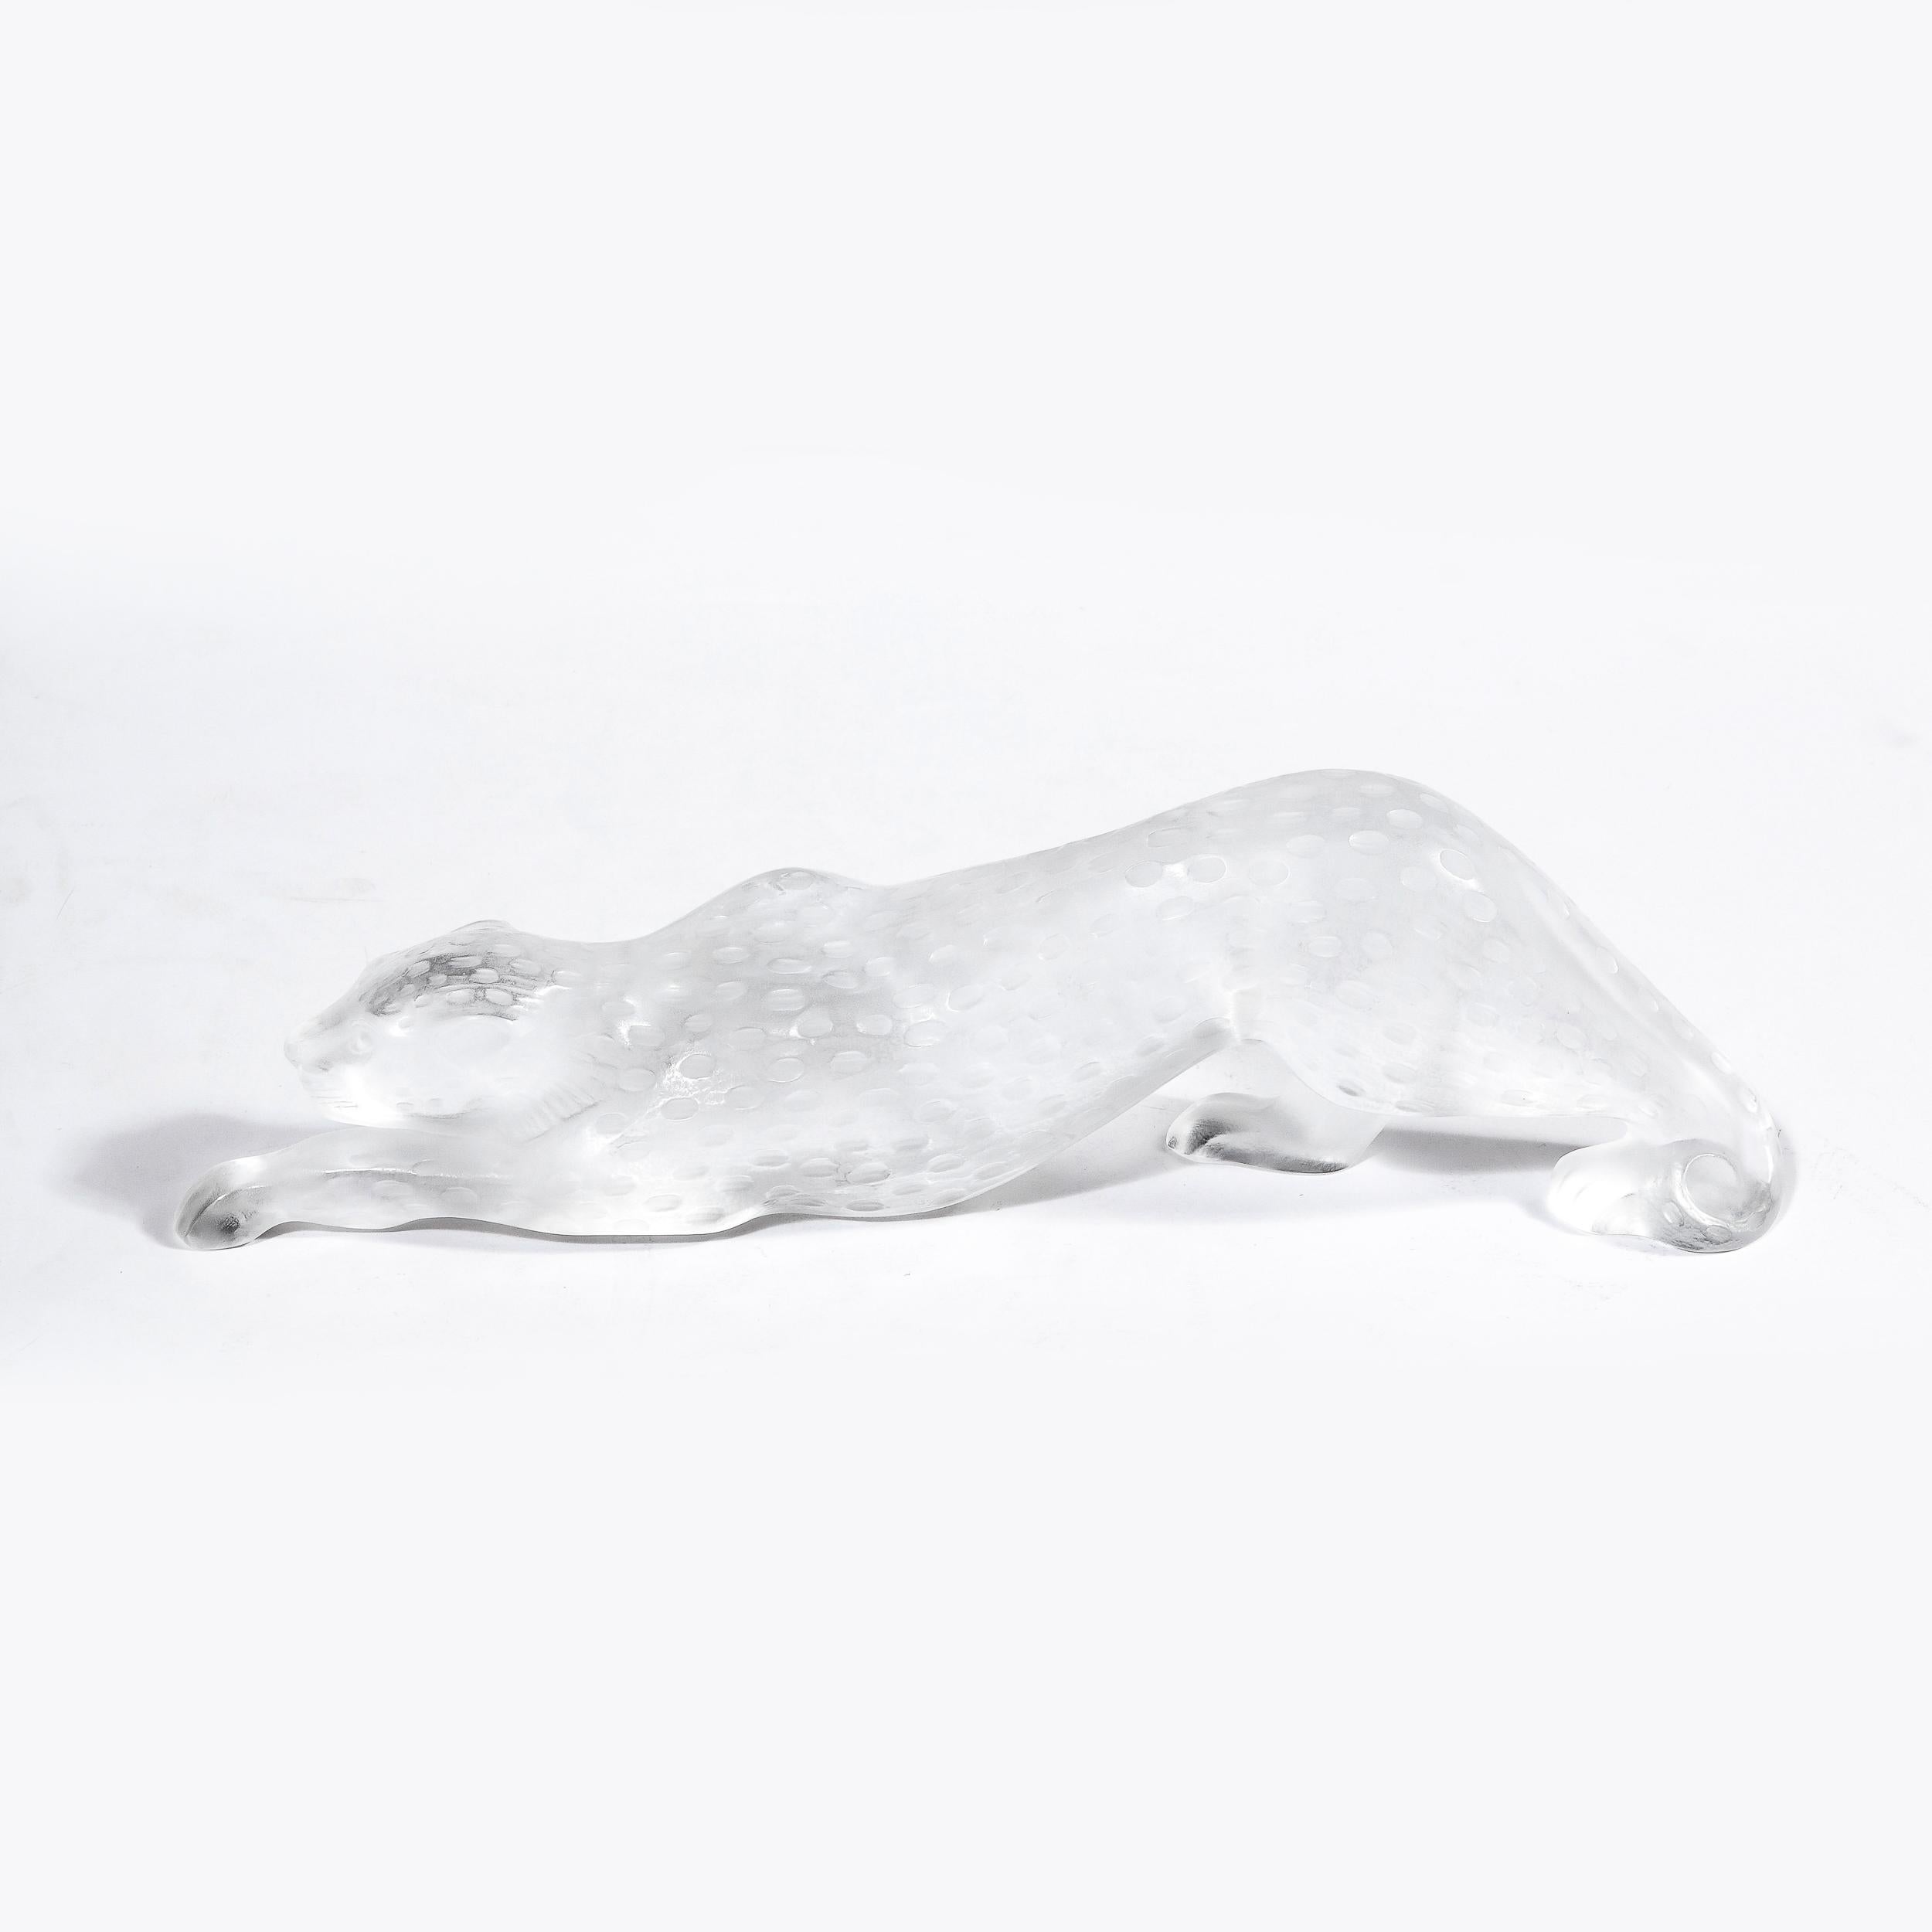 This elegant modernist frosted crystal leopard was realized in France by the legendary maker Lalique, circa 1980. It depicts a hunting panther, crawling low to the ground on all fours, apparently in the midst of stalking its prey. Realized in